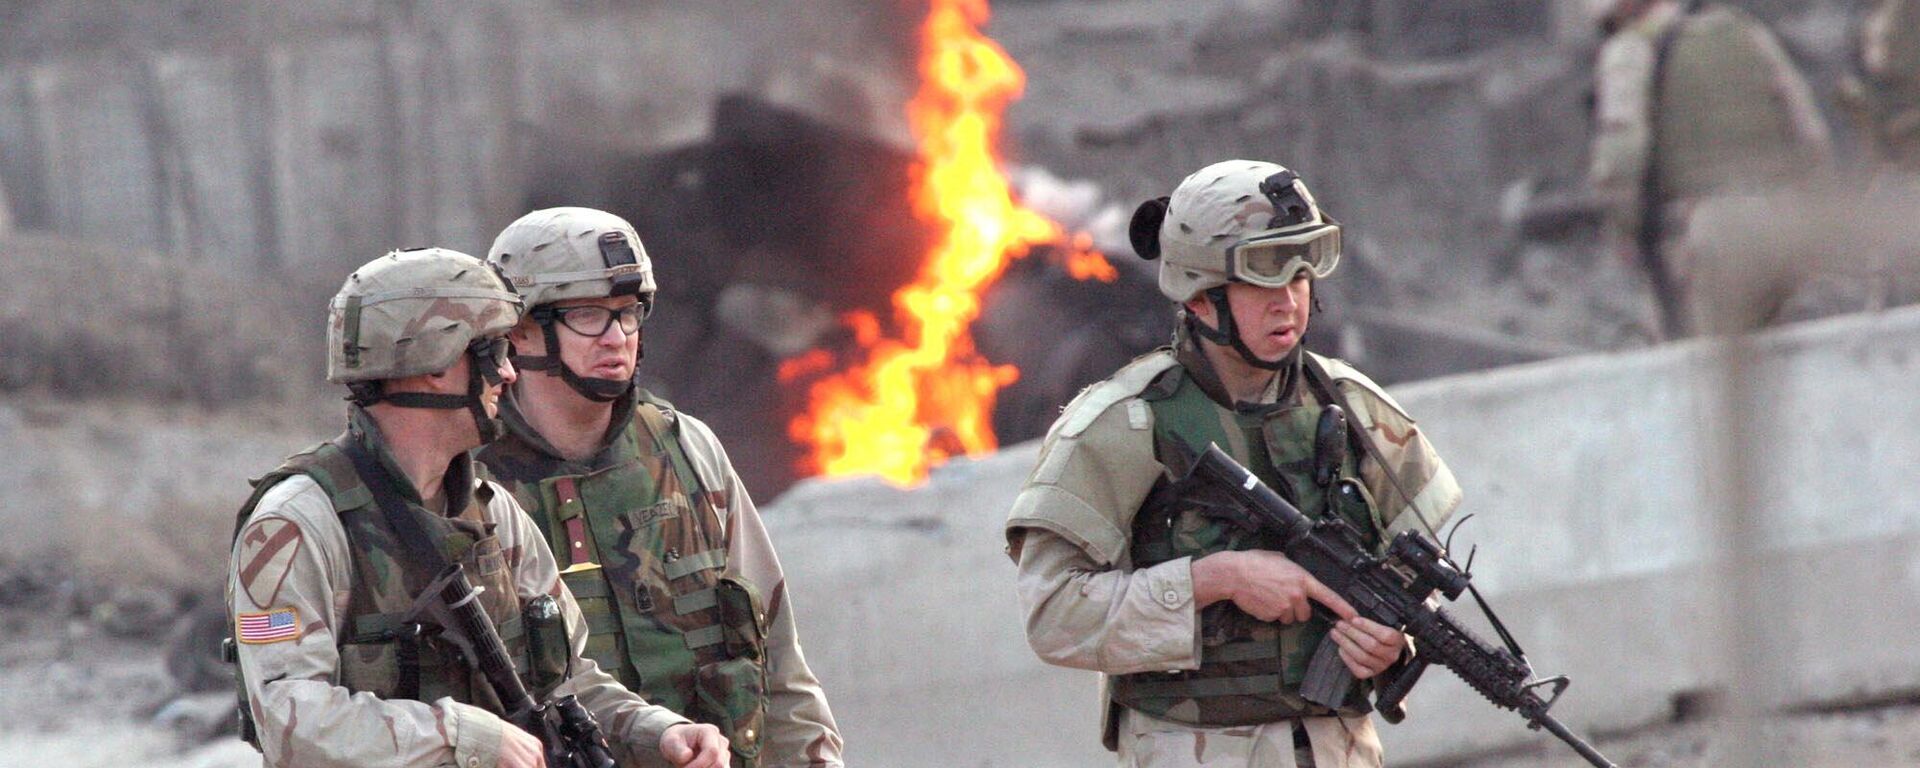 U.S. soldiers secure the site after an explosion in Baghdad, Wednesday, Jan. 19, 2005. A car bomb exploded near the Australian Embassy in central Baghdad on Wednesday, killing two people and wounding four, police and witnesses said. Australia said no embassy personnel were killed or hurt in the explosion - اسپوتنیک ایران  , 1920, 08.02.2024